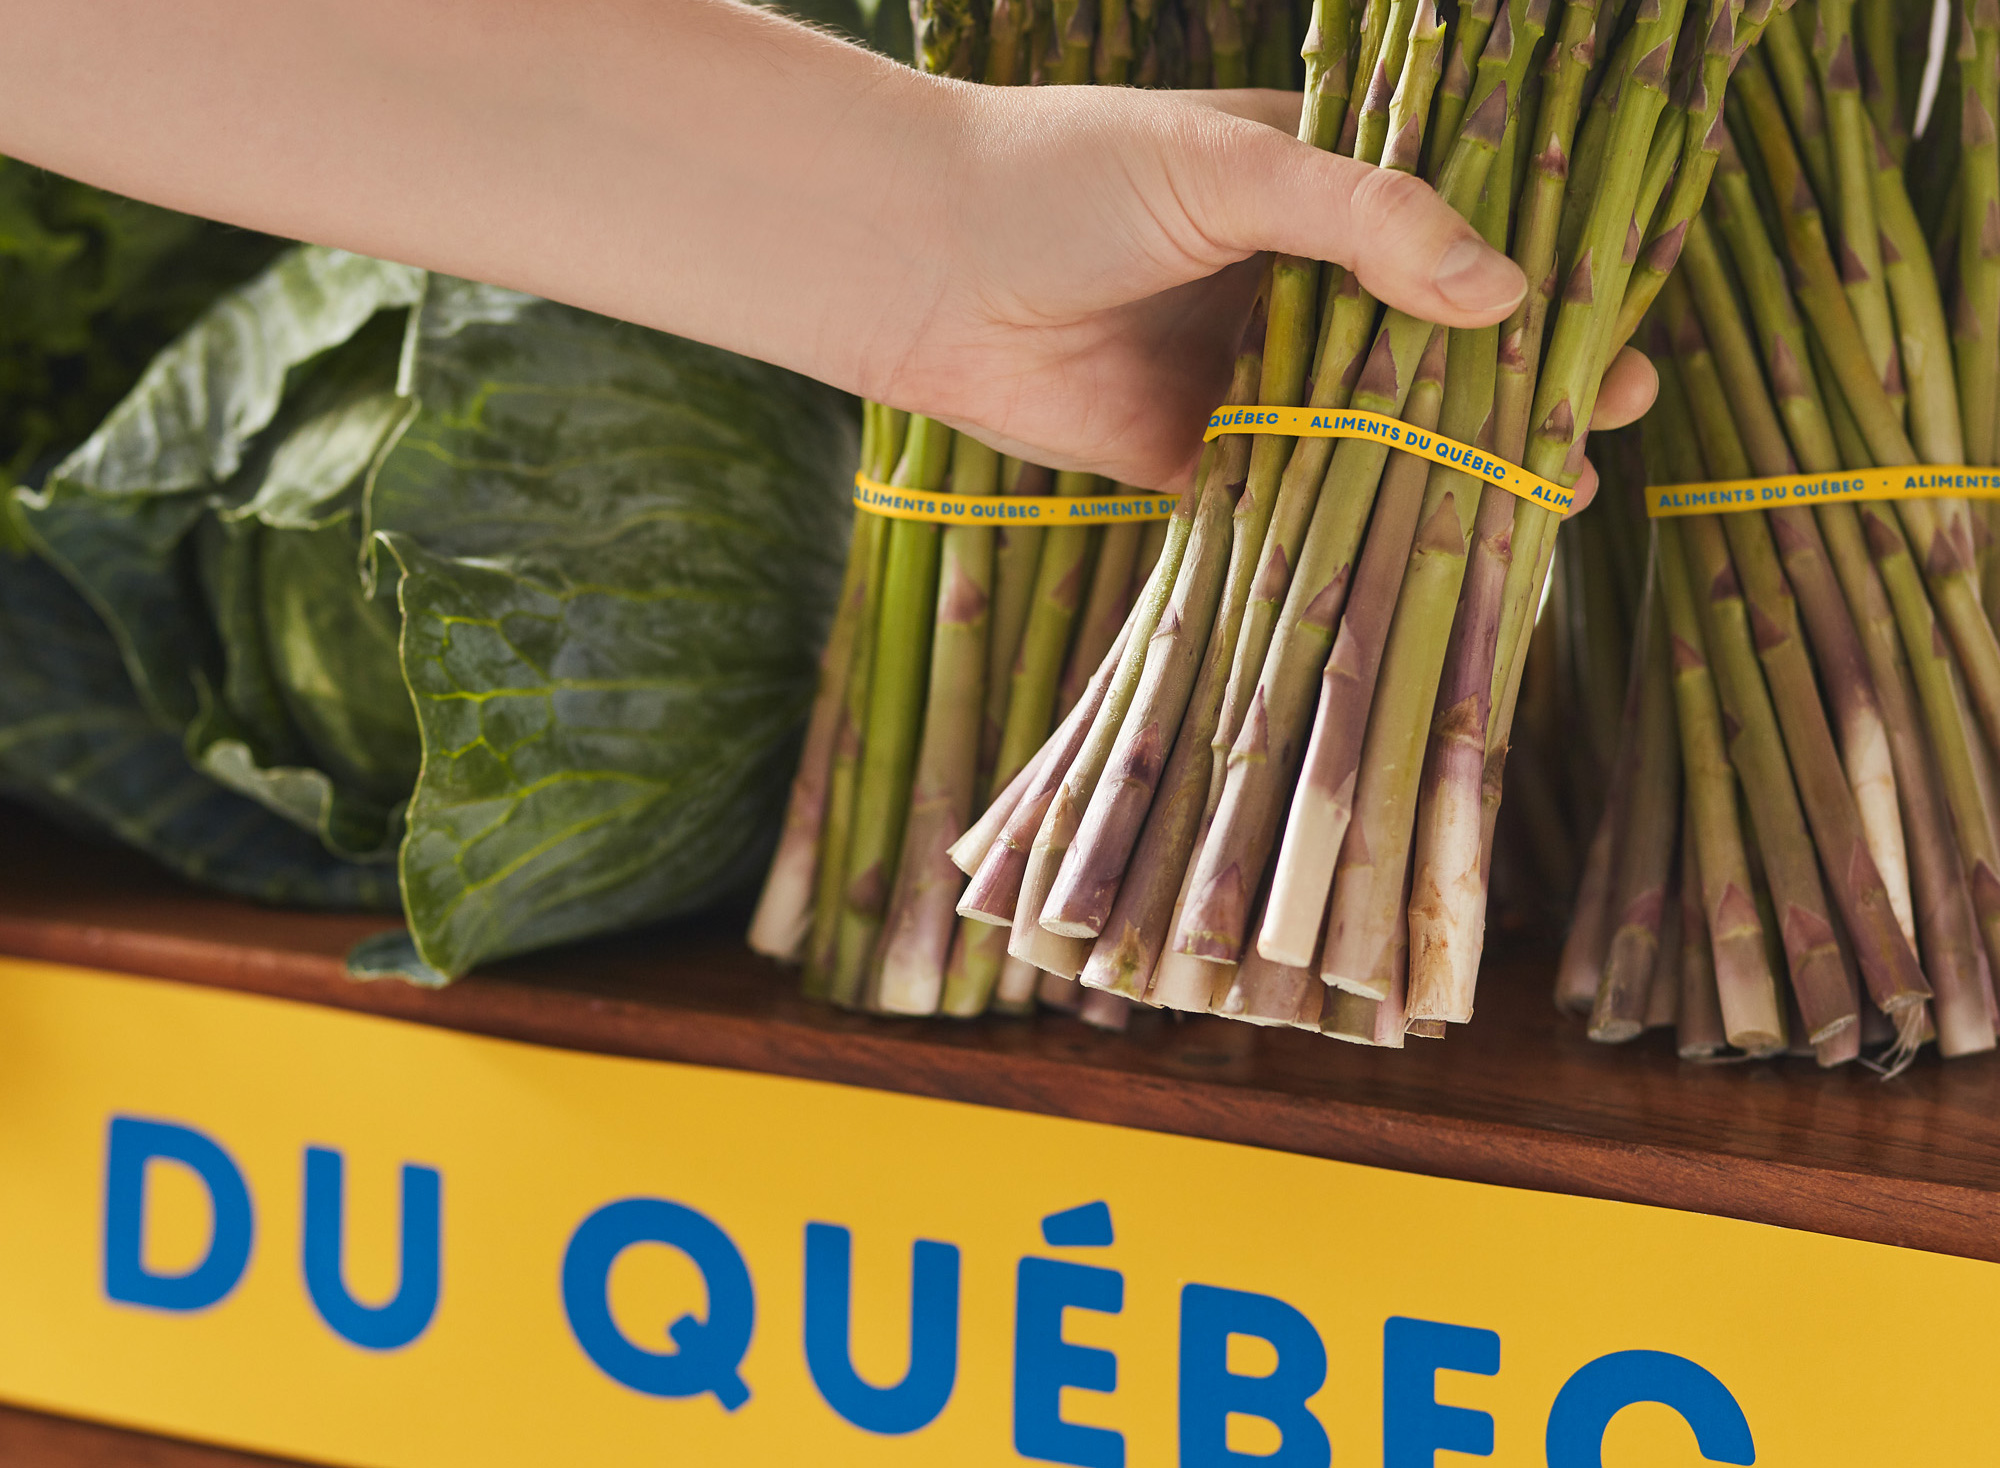 New Logo and Identity for Aliments du Québec by lg2